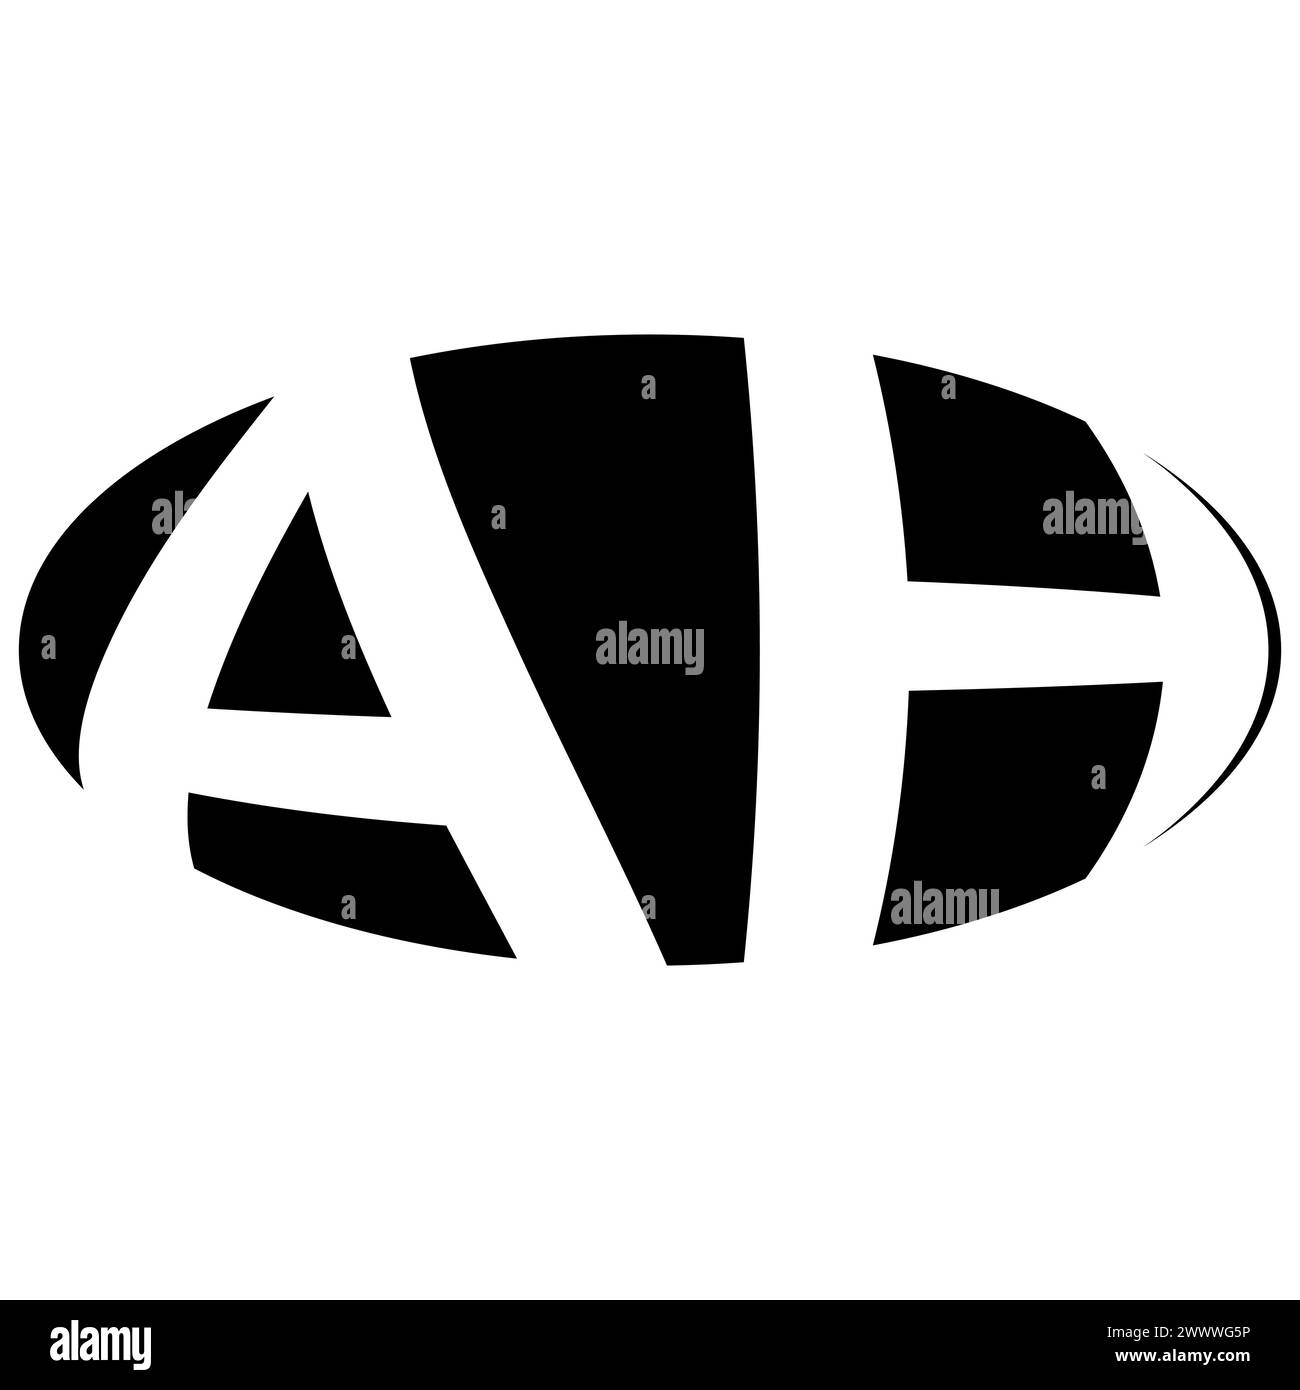 Oval logo double letter A H two letters ah ha Stock Vector